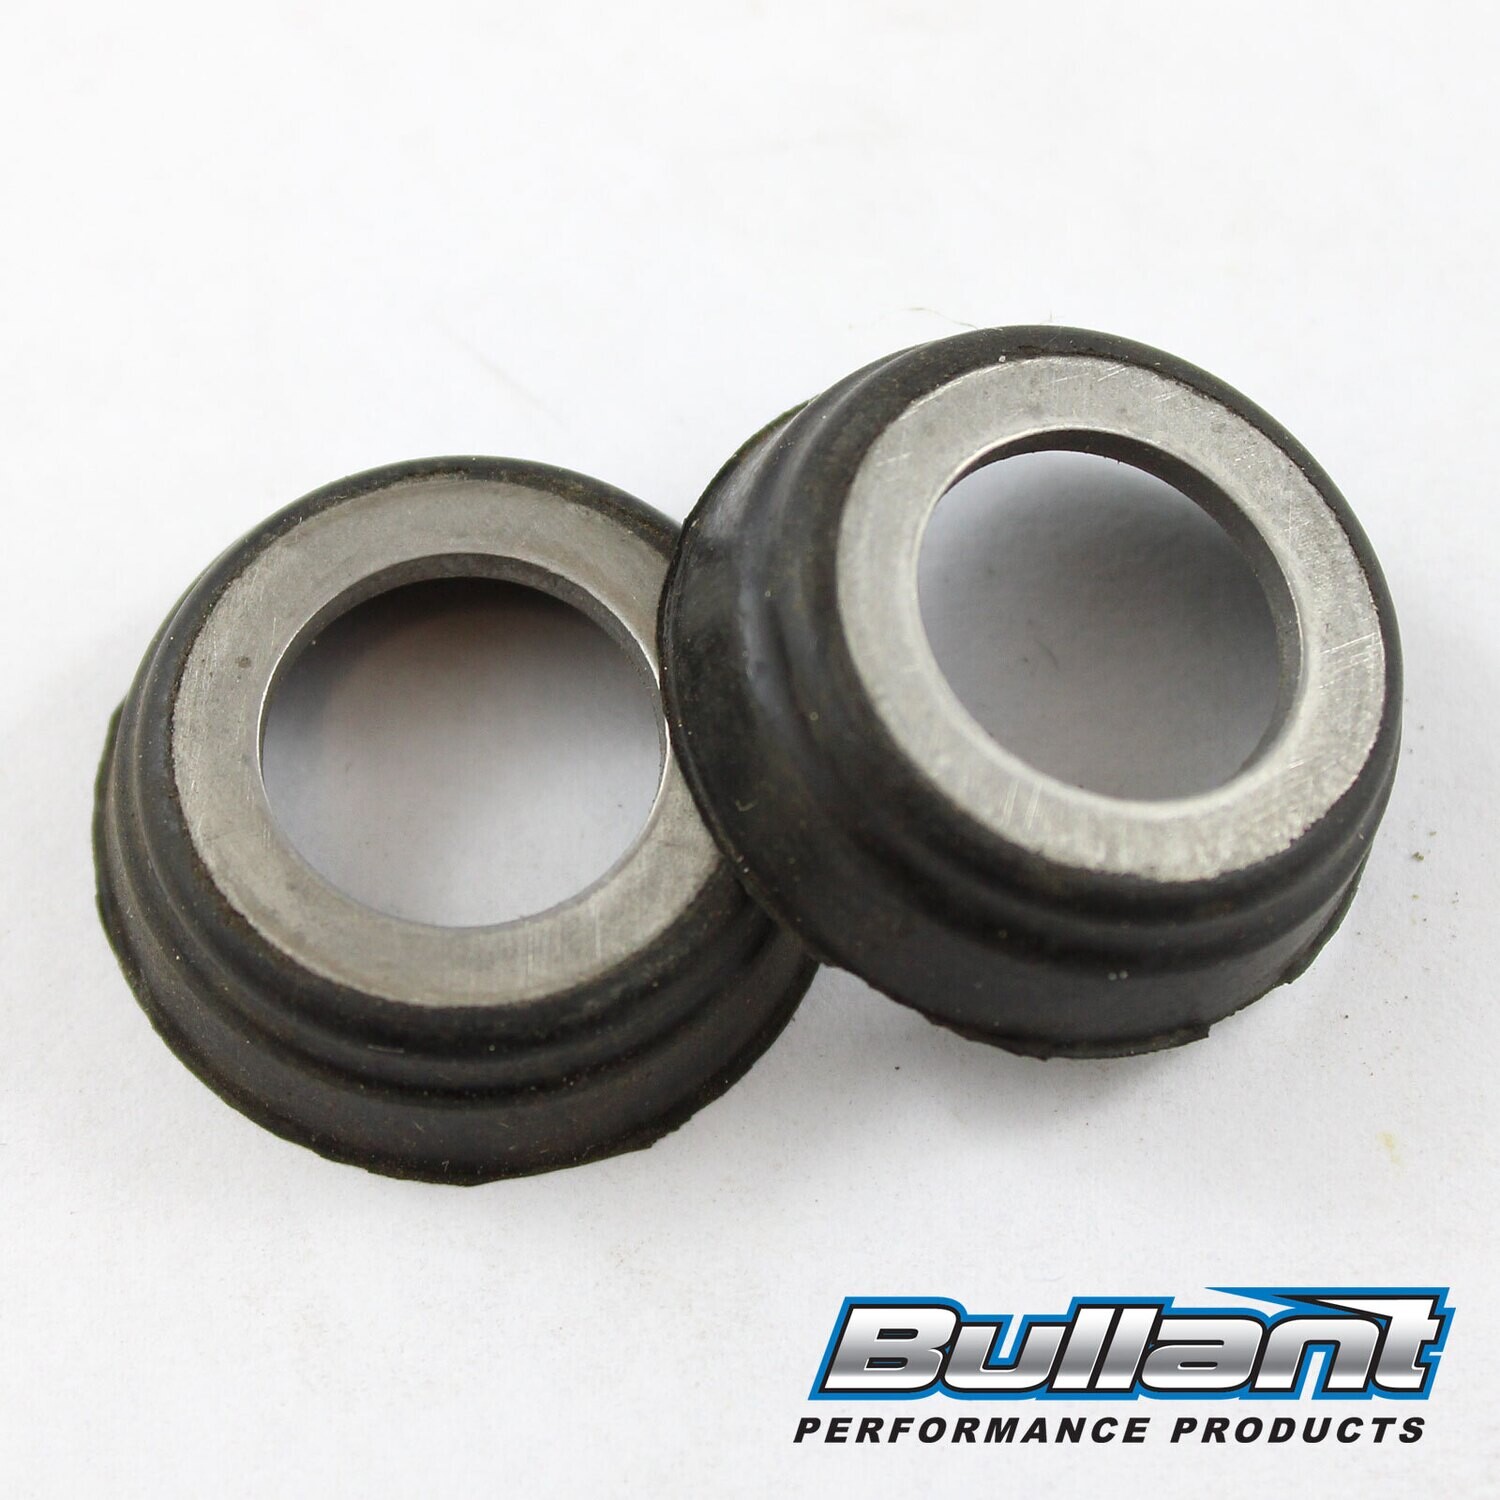 Rod End Rubber Seals for 7/16